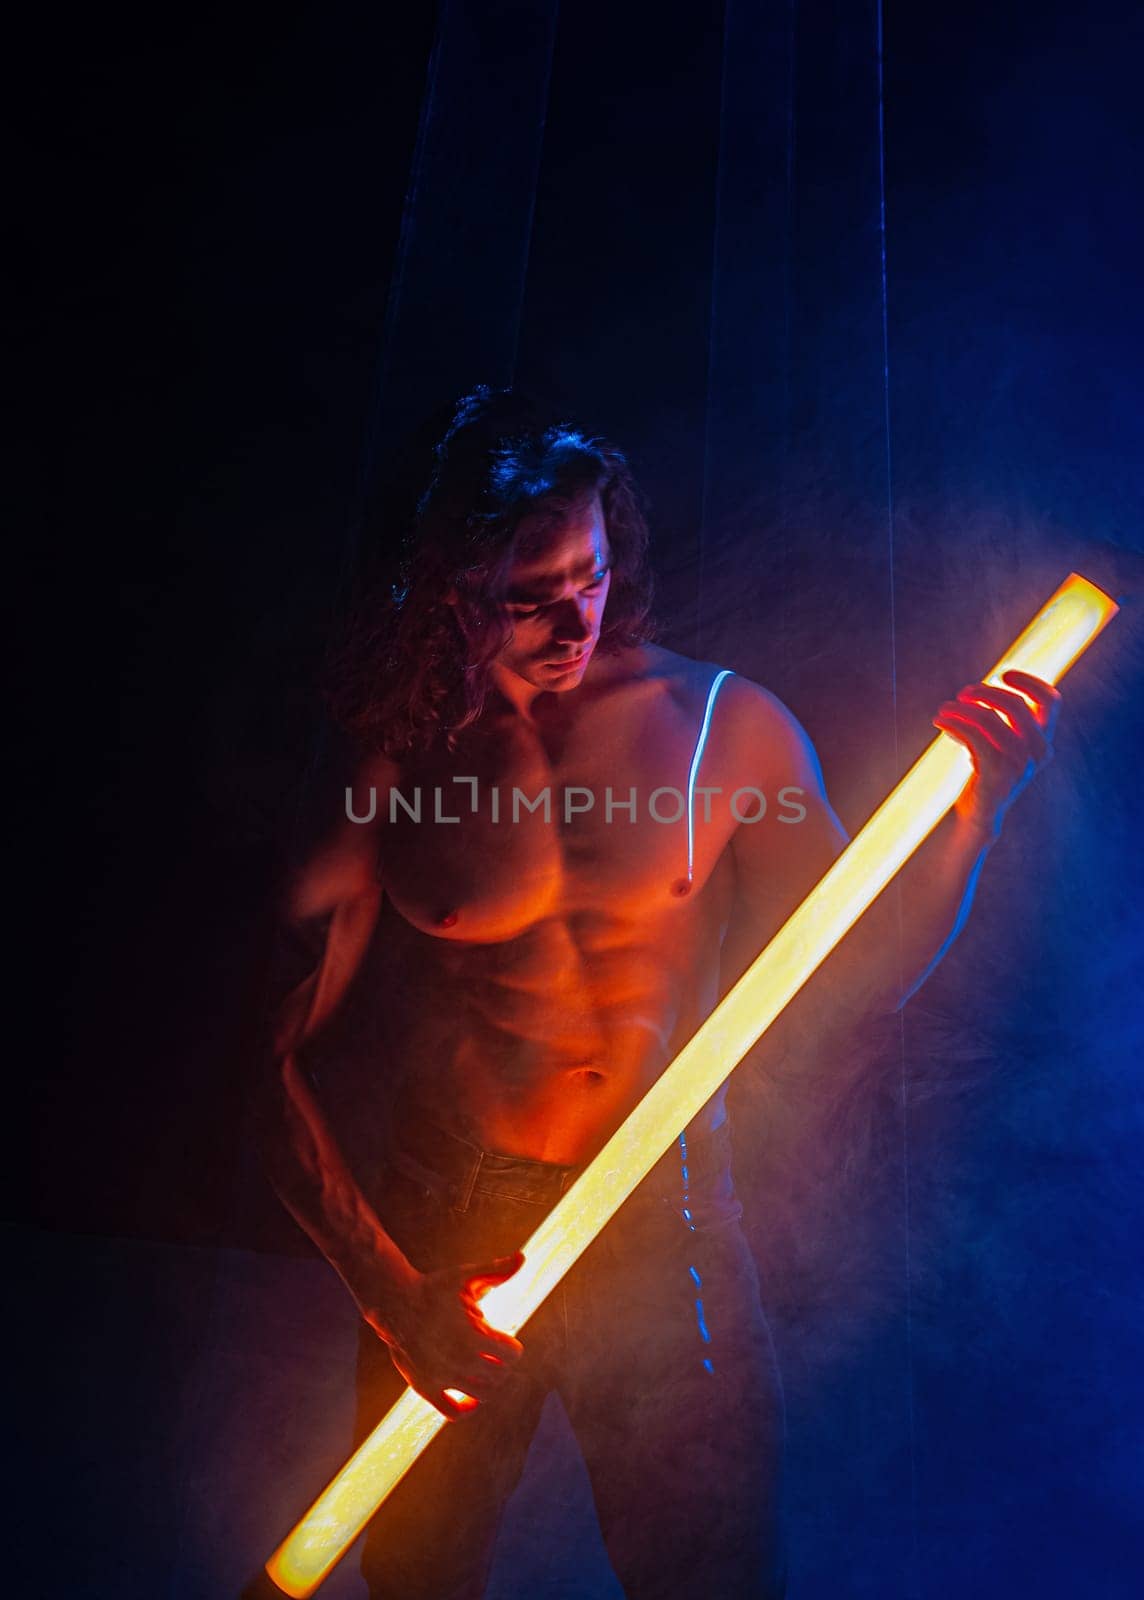 Sporty handsome man with neon light tube under colorful illumination, laser, smoke room. Muscular strong guy with naked torso abs. Projection illusion mapping. Futuristic model.